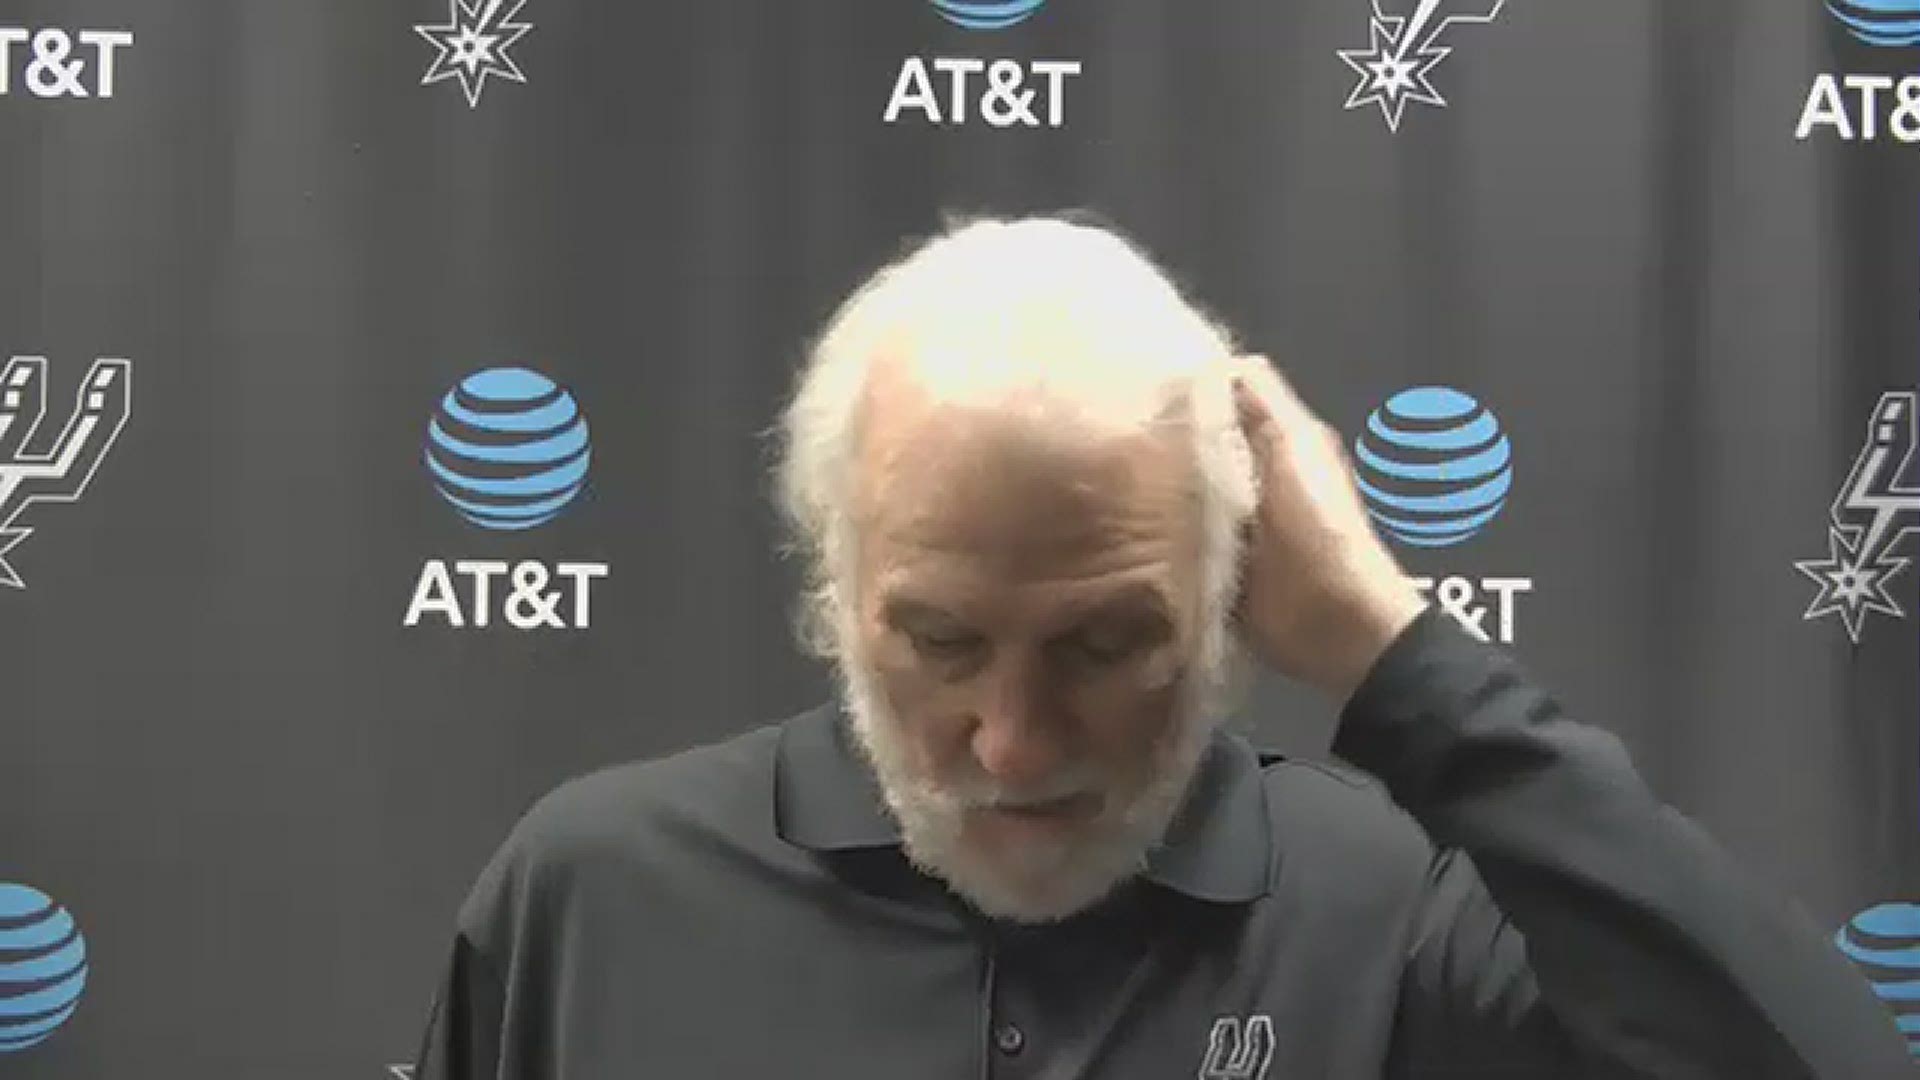 "I think it was an impressive win on a back to back, tough loss last night and they just keep on truckin," Popovich said after the win.